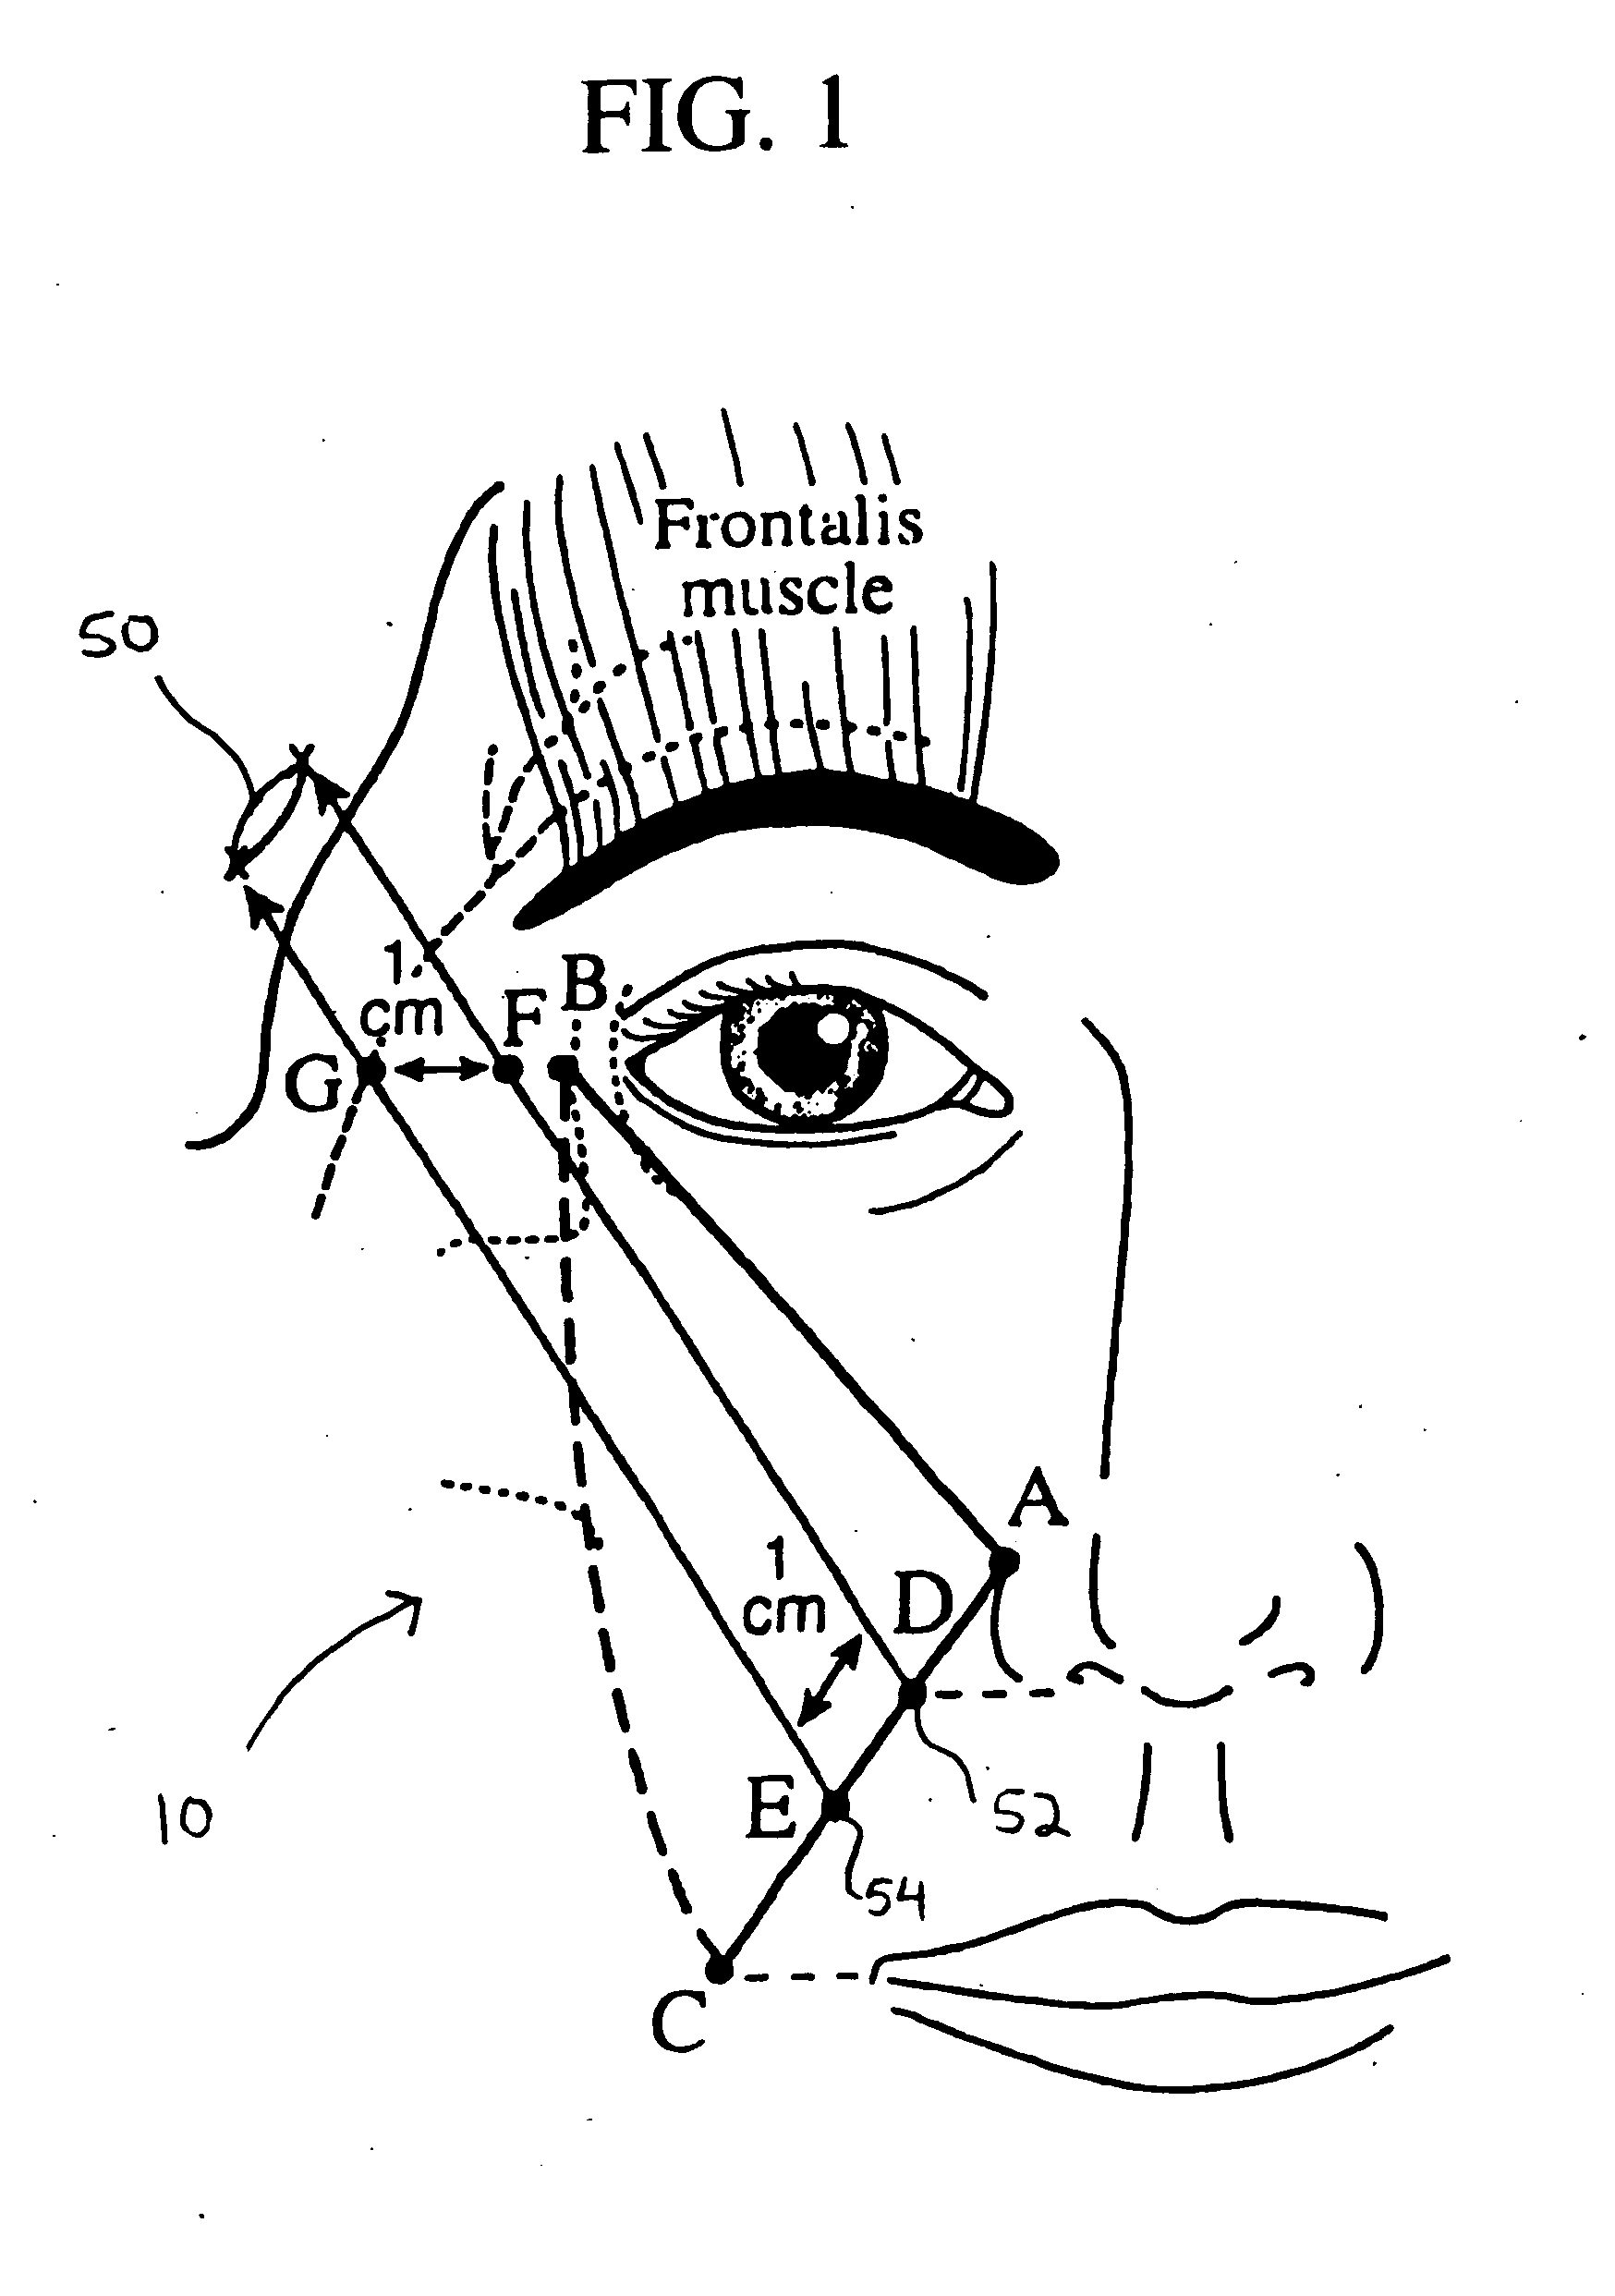 Suture and method using a suture